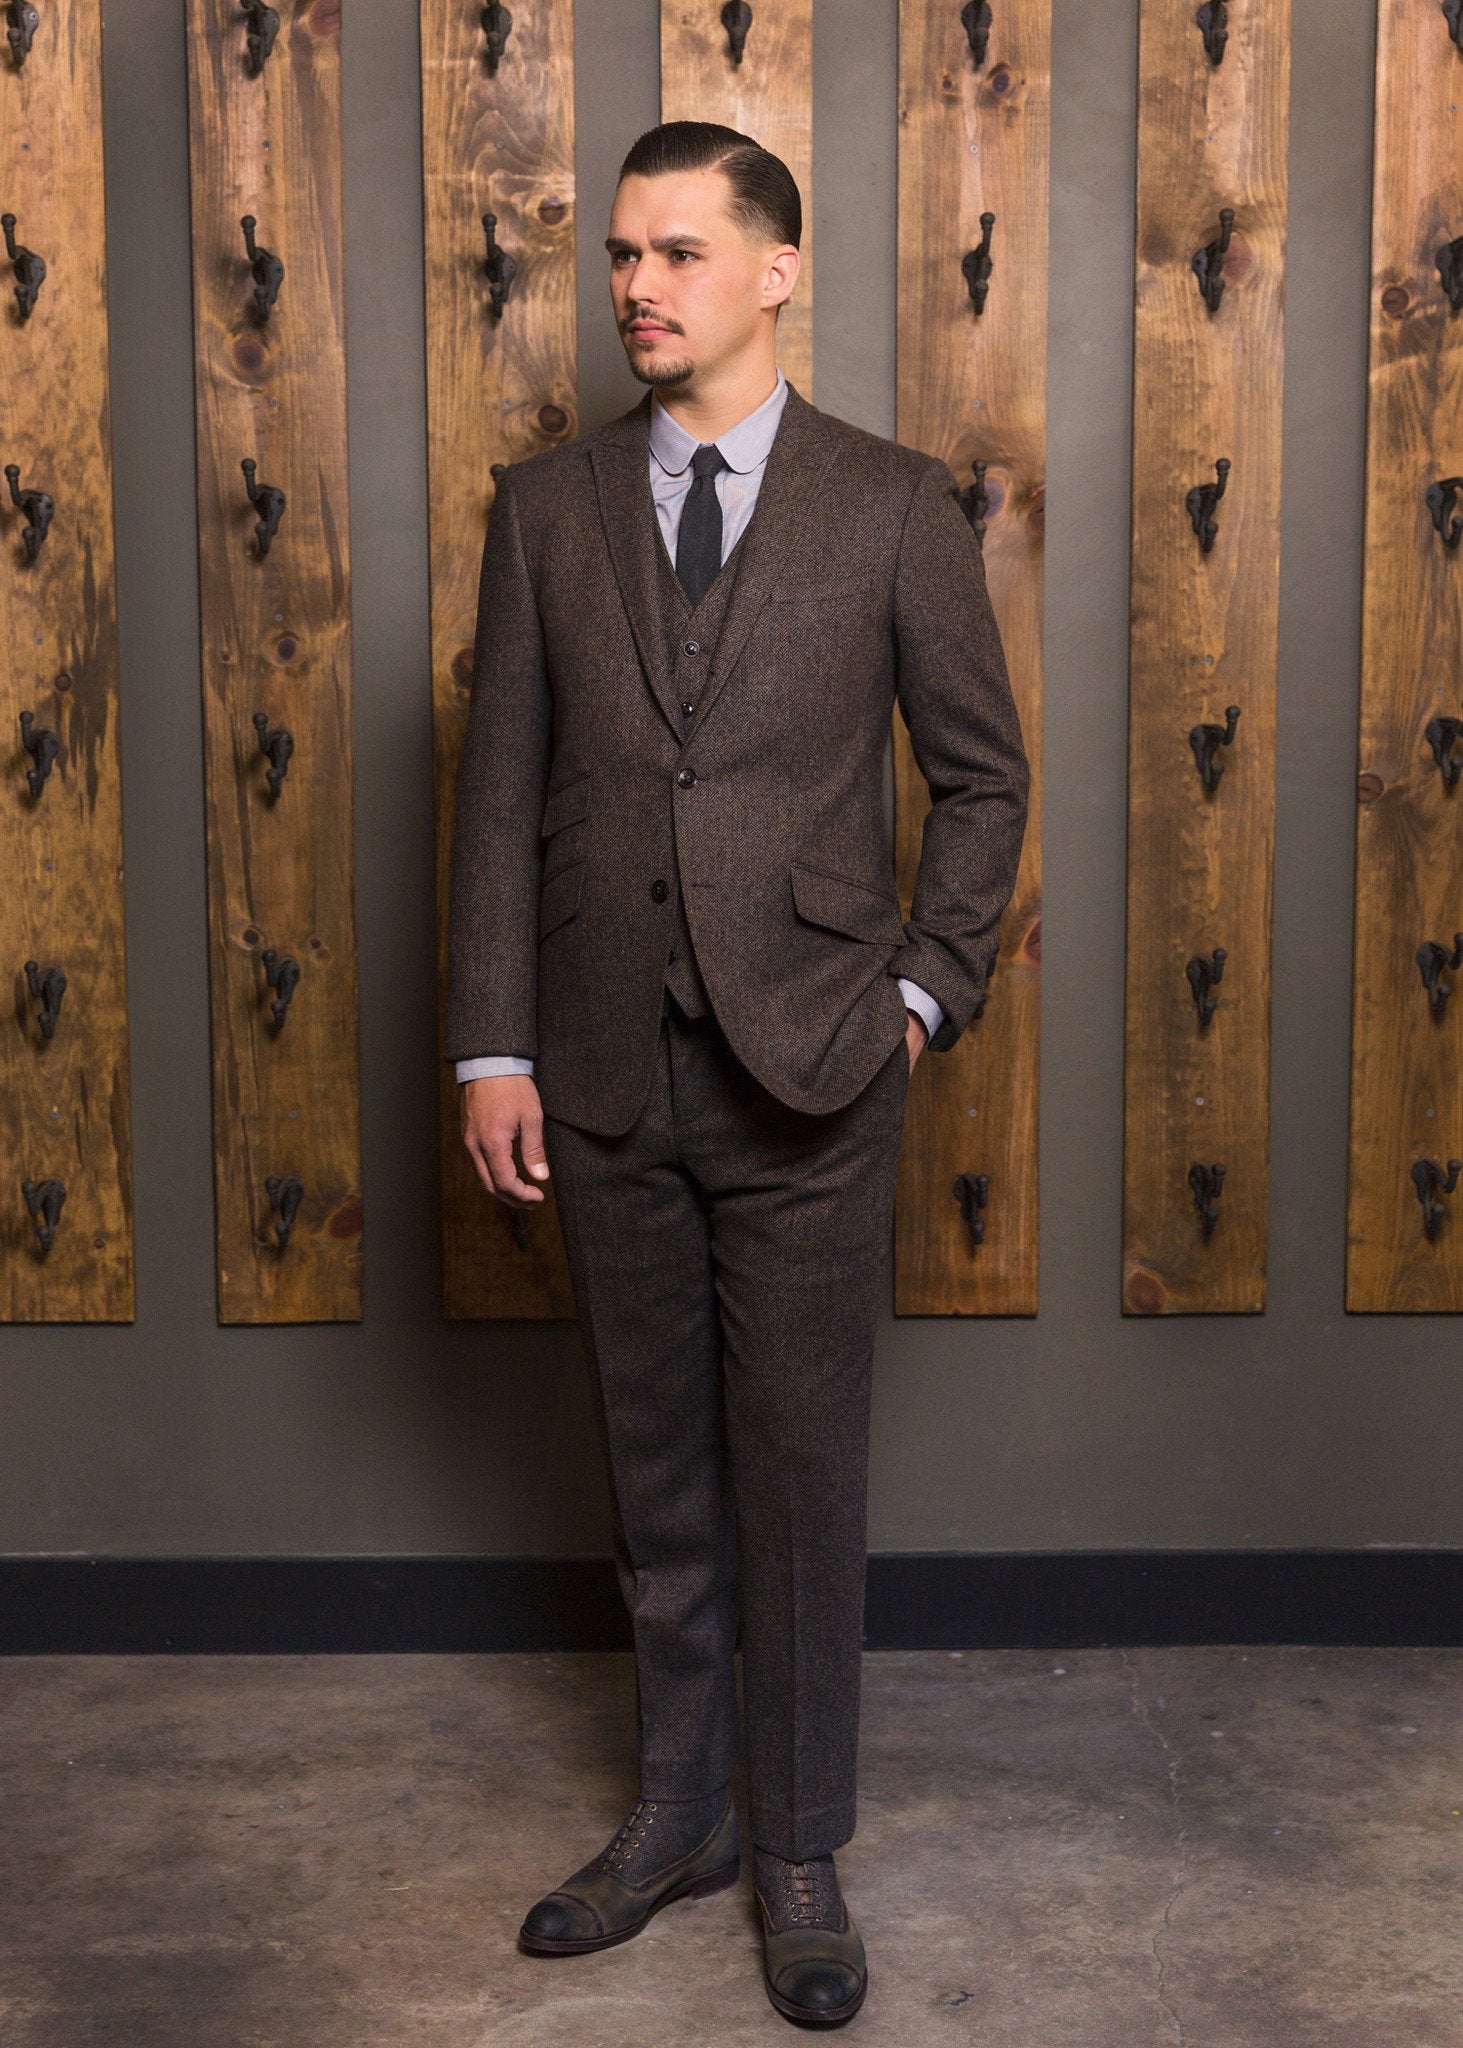 Crossley Suit-Bykowski Tailor & Garb slim fit Wool tailored fit Rustic semi peak lapel prohibition peaky blinders Made in USA heritage clothing Handcrafted Gatsby English Tweed Edwardian Dapper Classic Art Deco 1930's 1920's 1910's